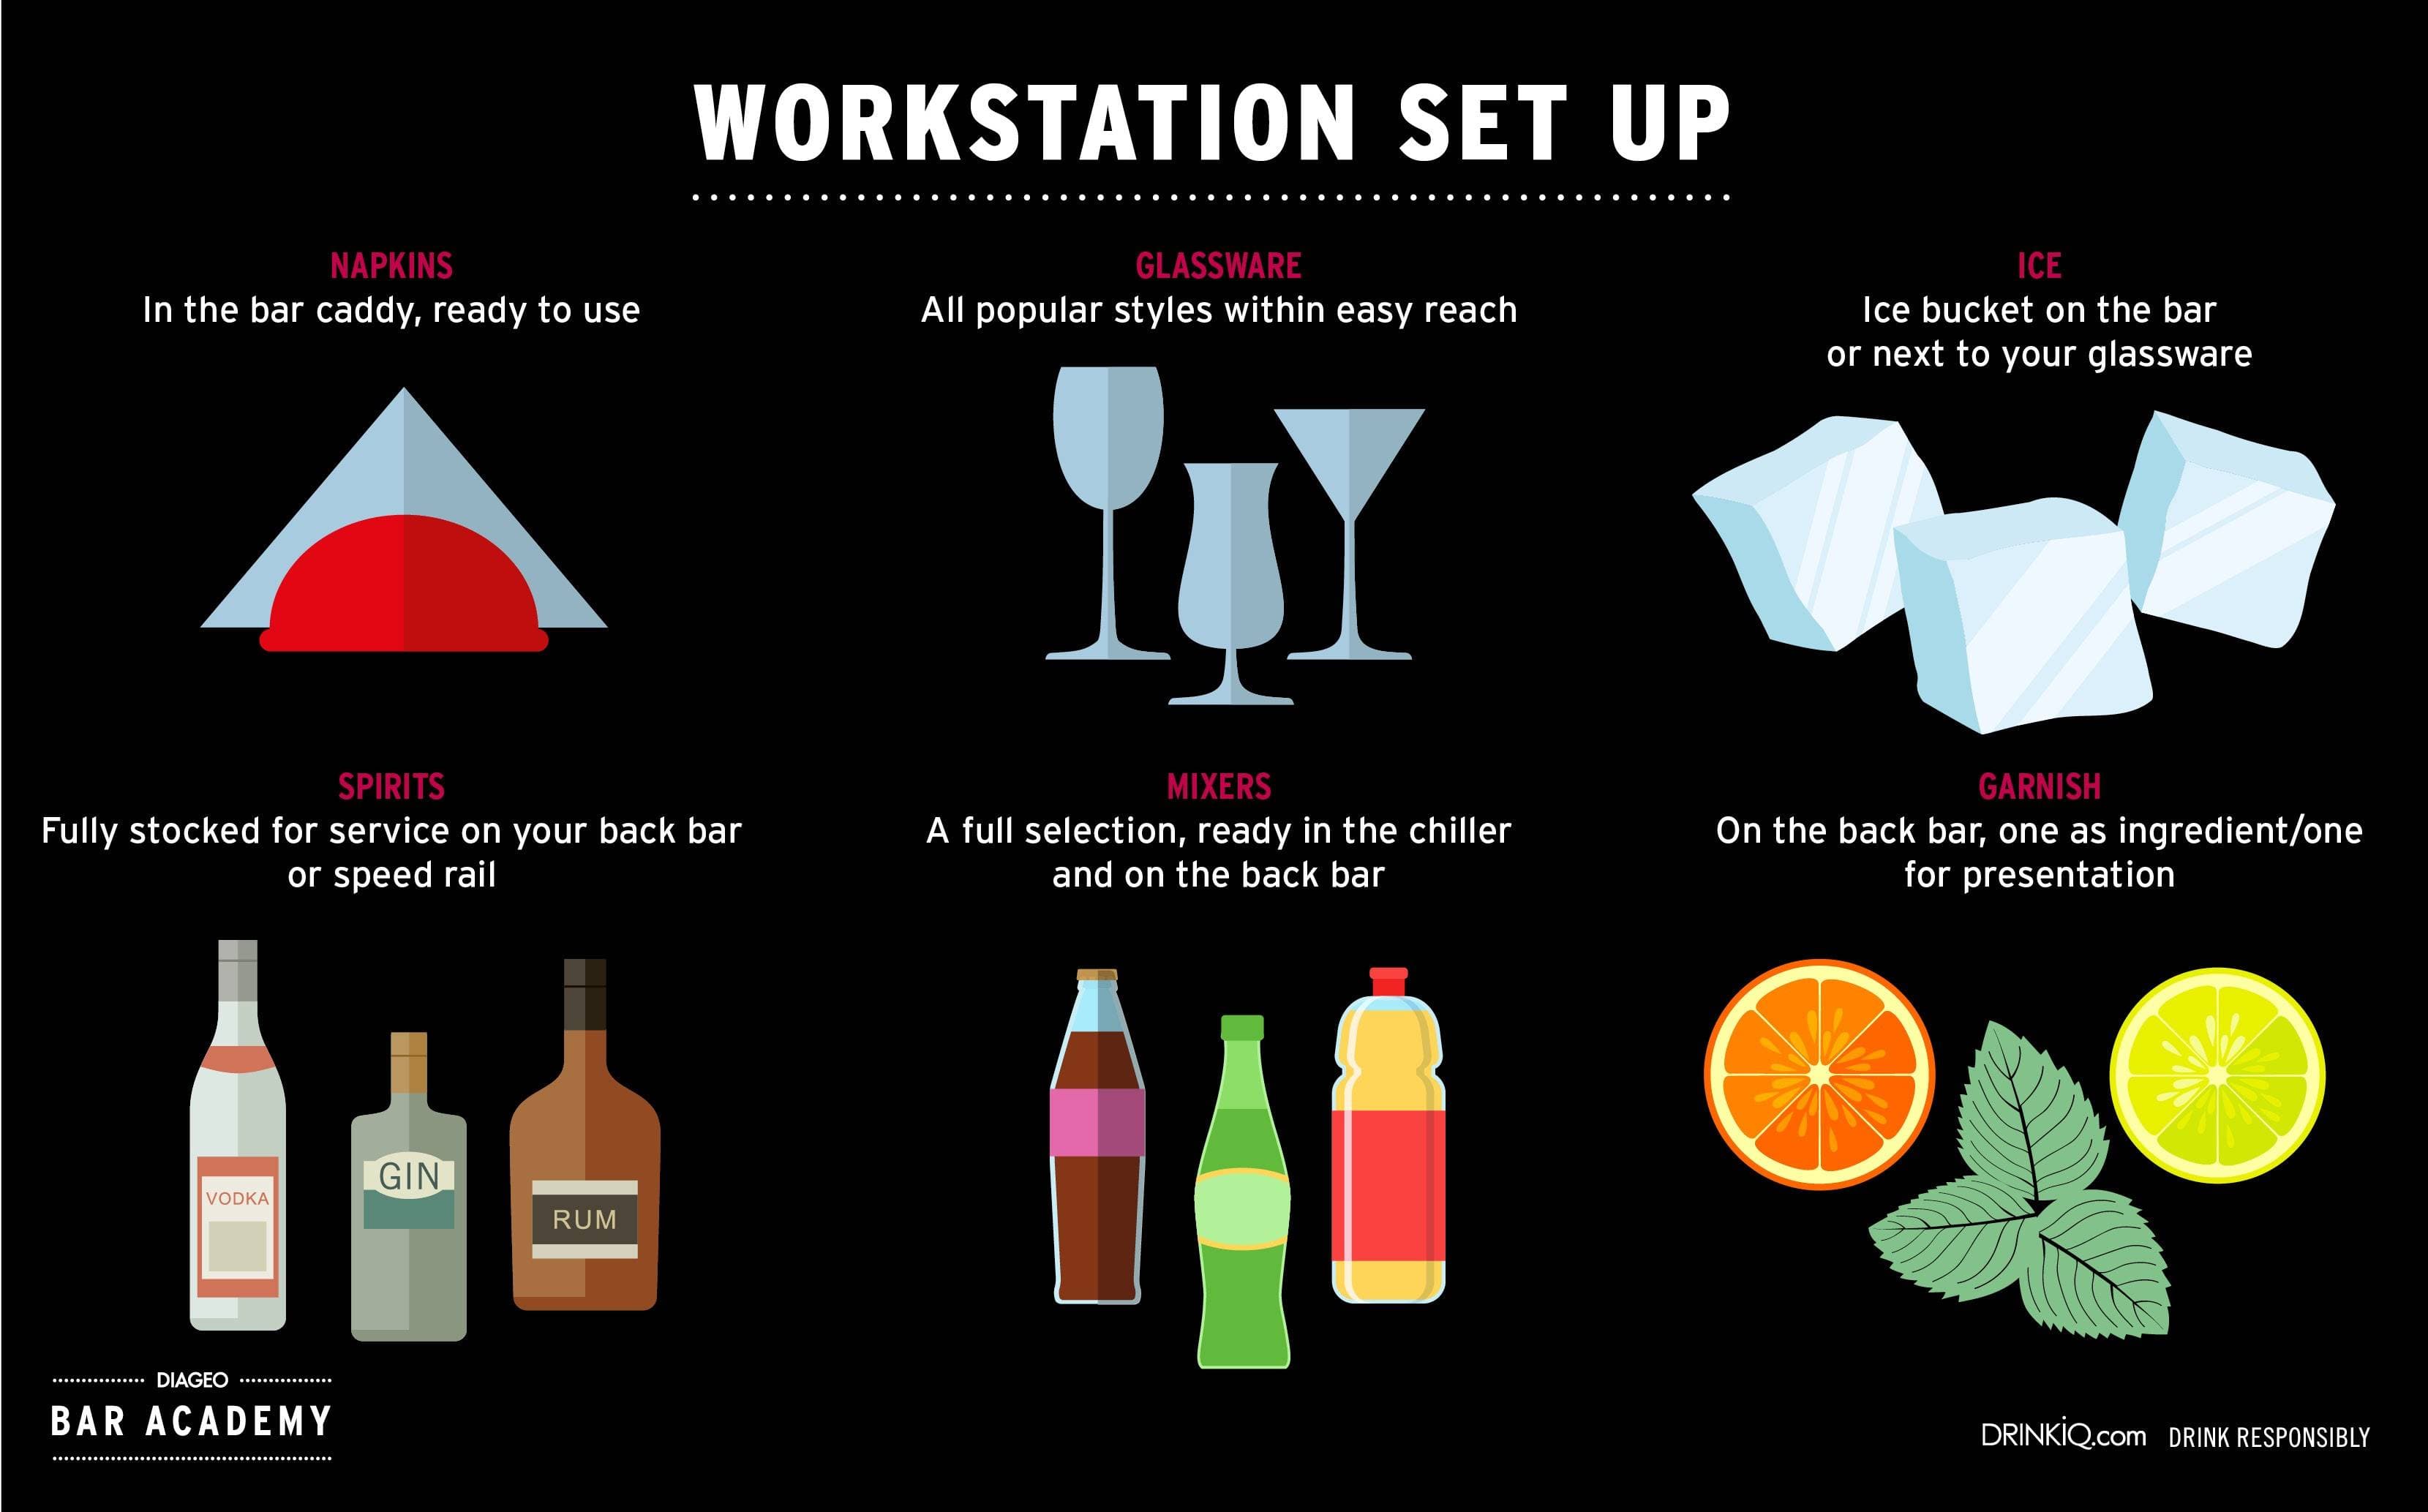 Workstation set up diagram covering napkins, glassware, ice, spirits, mixers and garnishes.